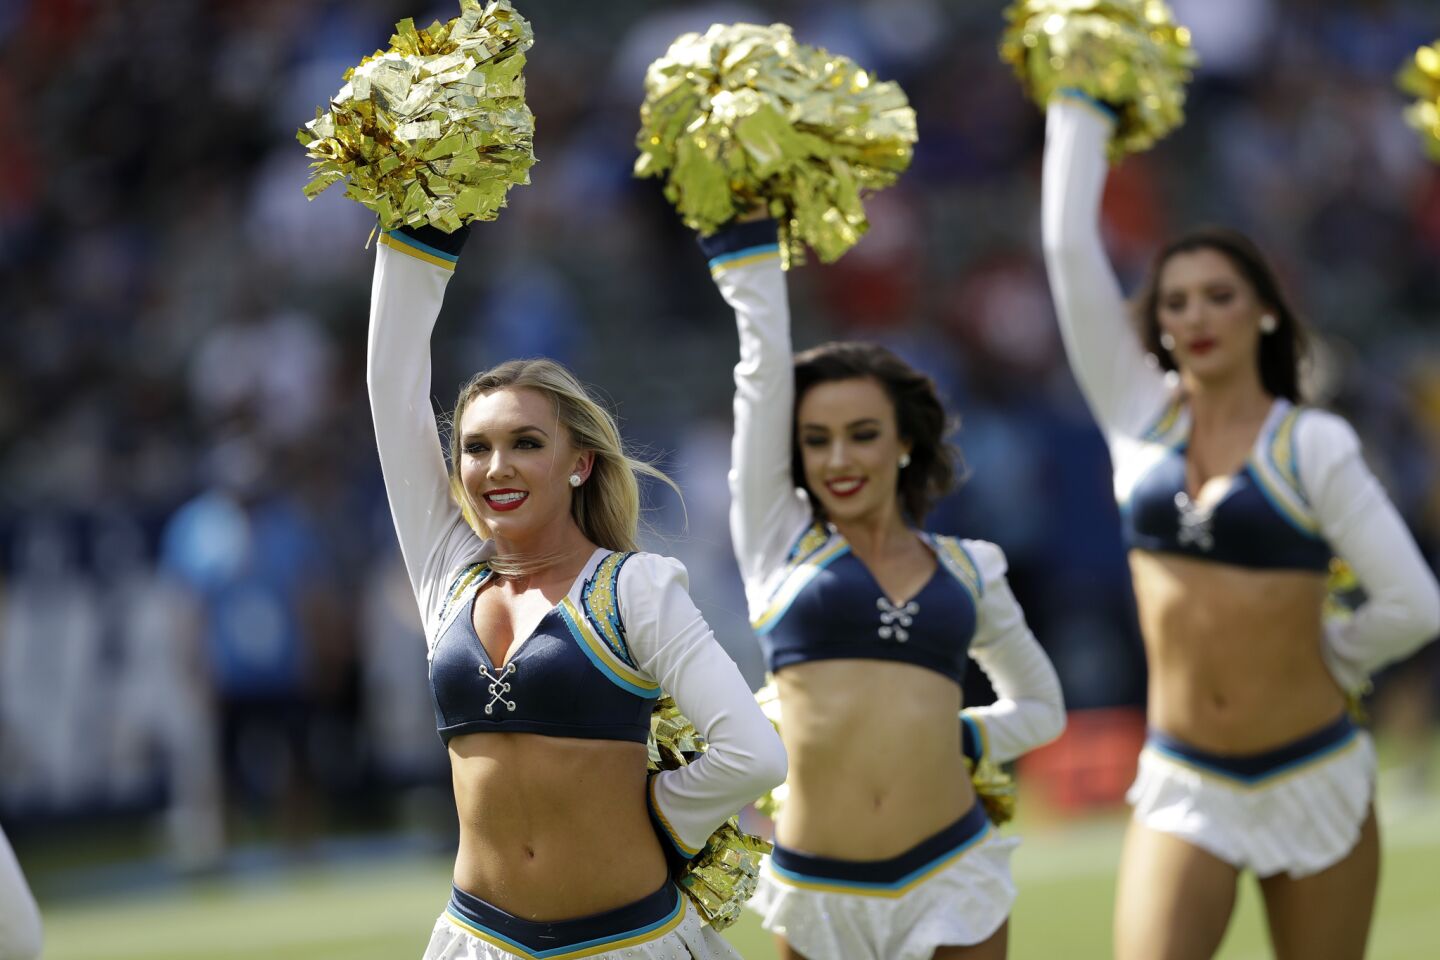 The Charger Girls take the field prior to an NFL football game between the Los Angeles Chargers and the San Francisco 49ers, Sunday, Sept. 30, 2018, in Carson, Calif.